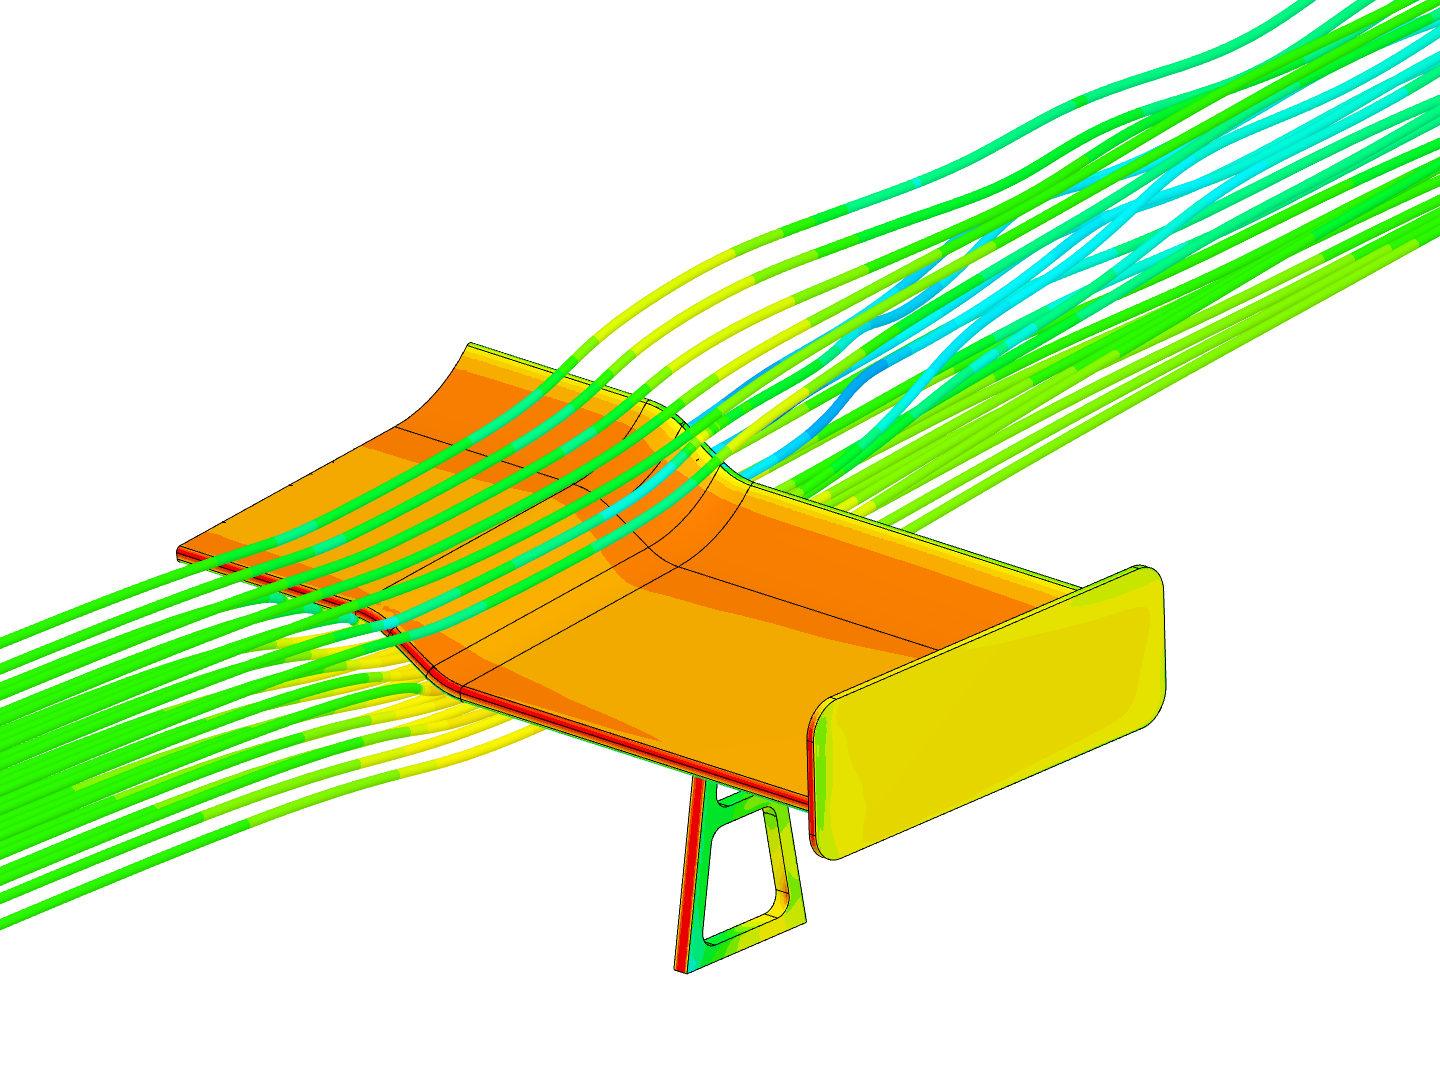 Coursera - CFD image